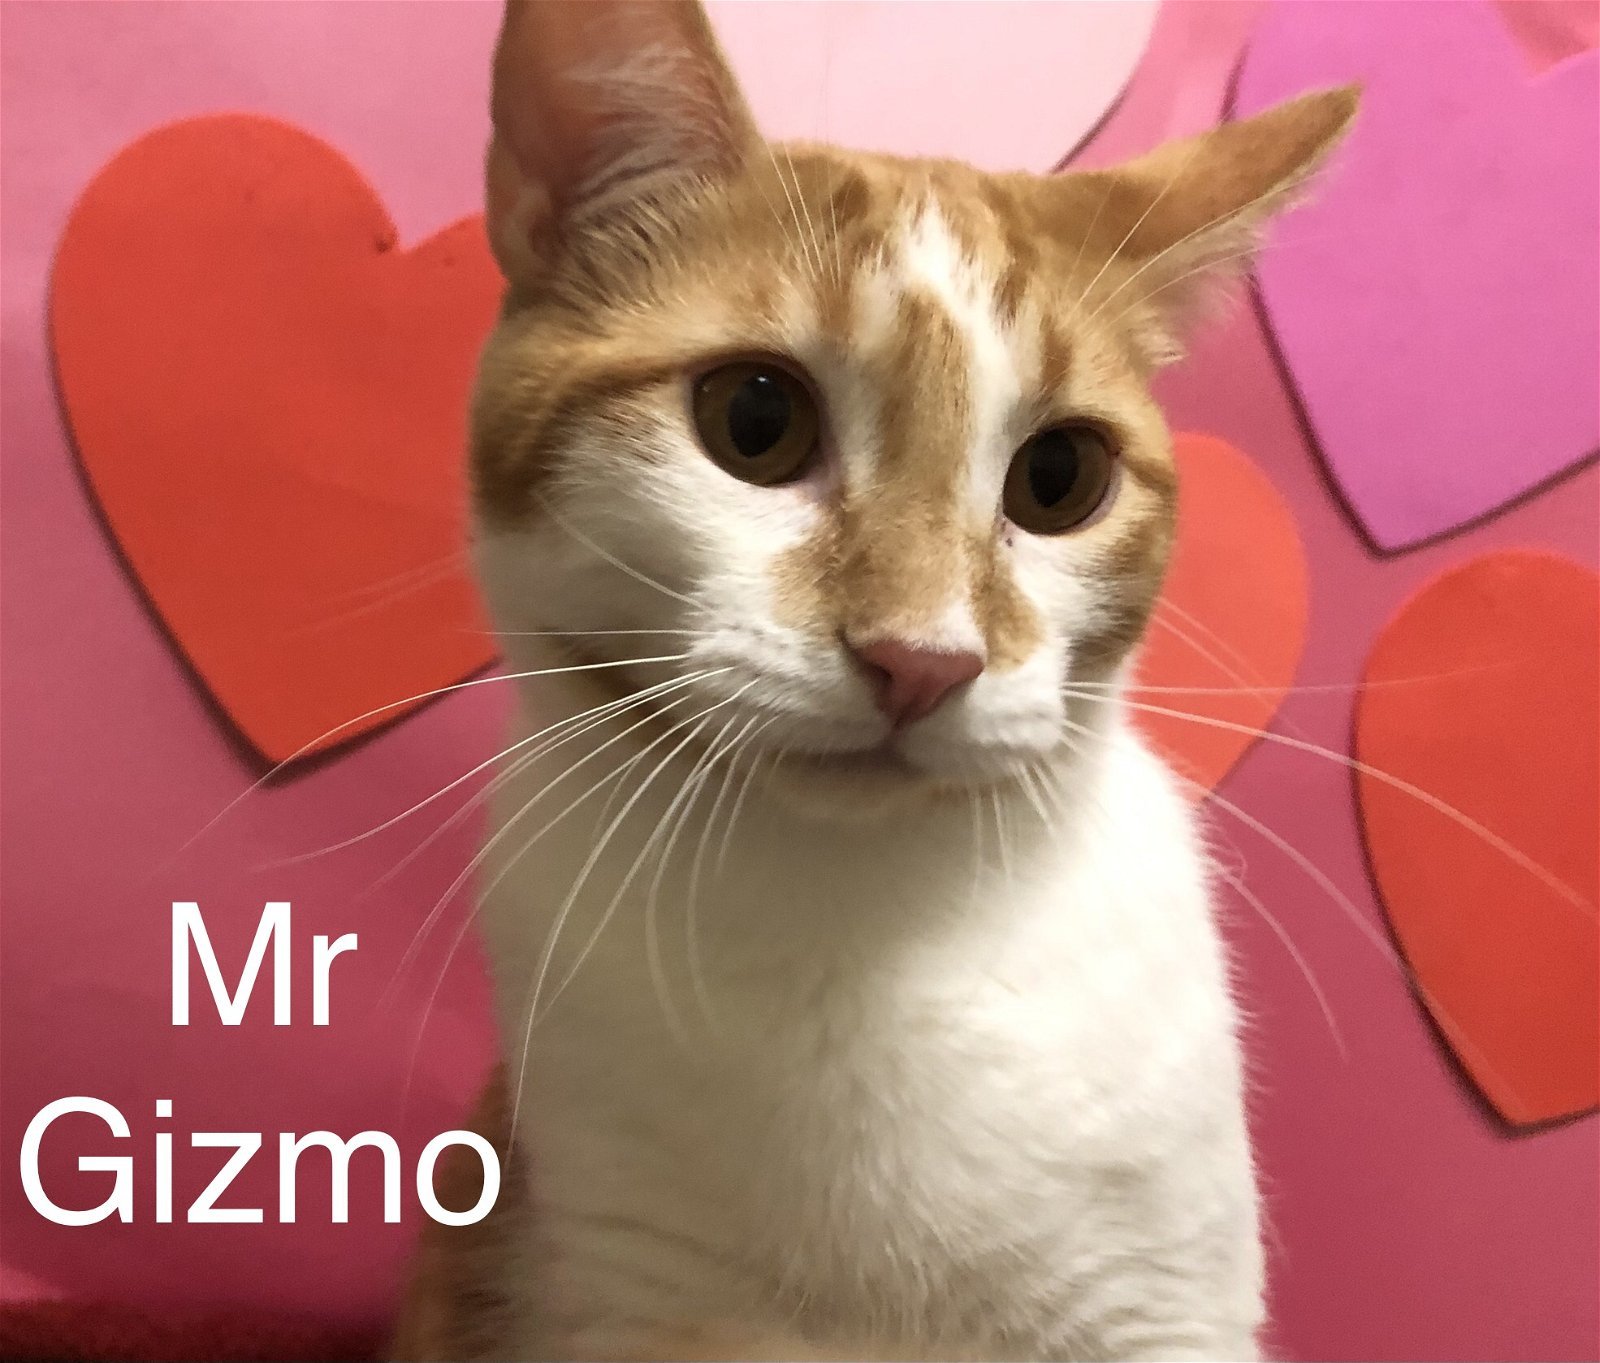 Mr Gizmo at Martinez Pet Food Express March 23rd